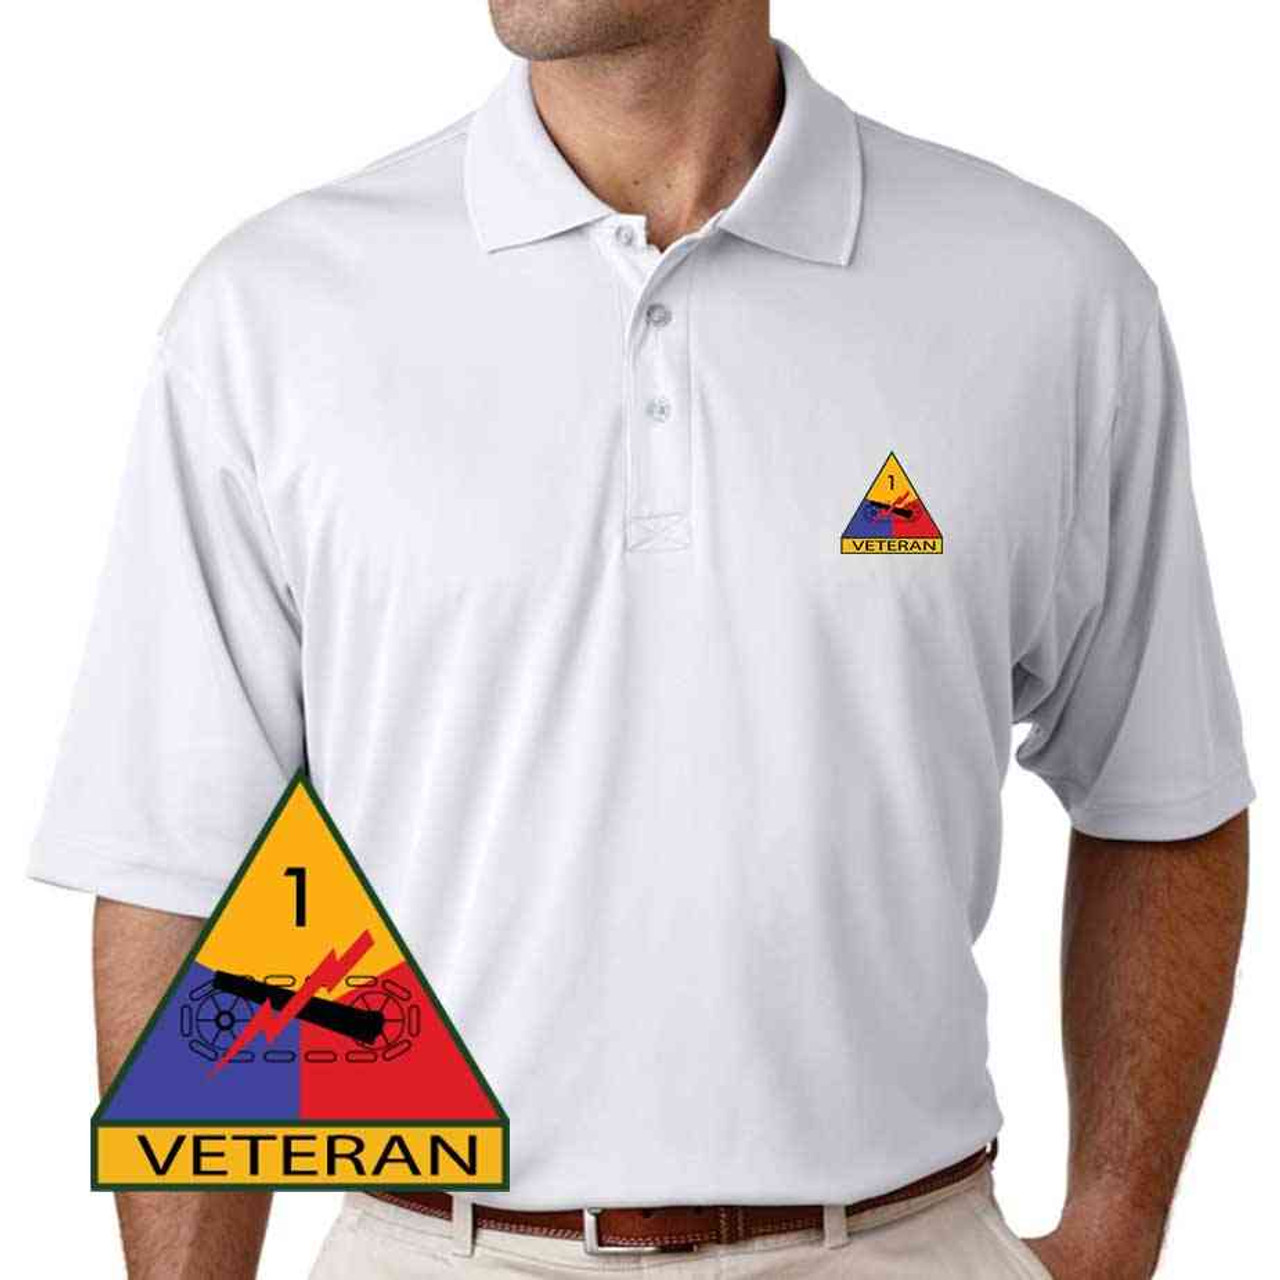 1st armored division veteran performance polo shirt